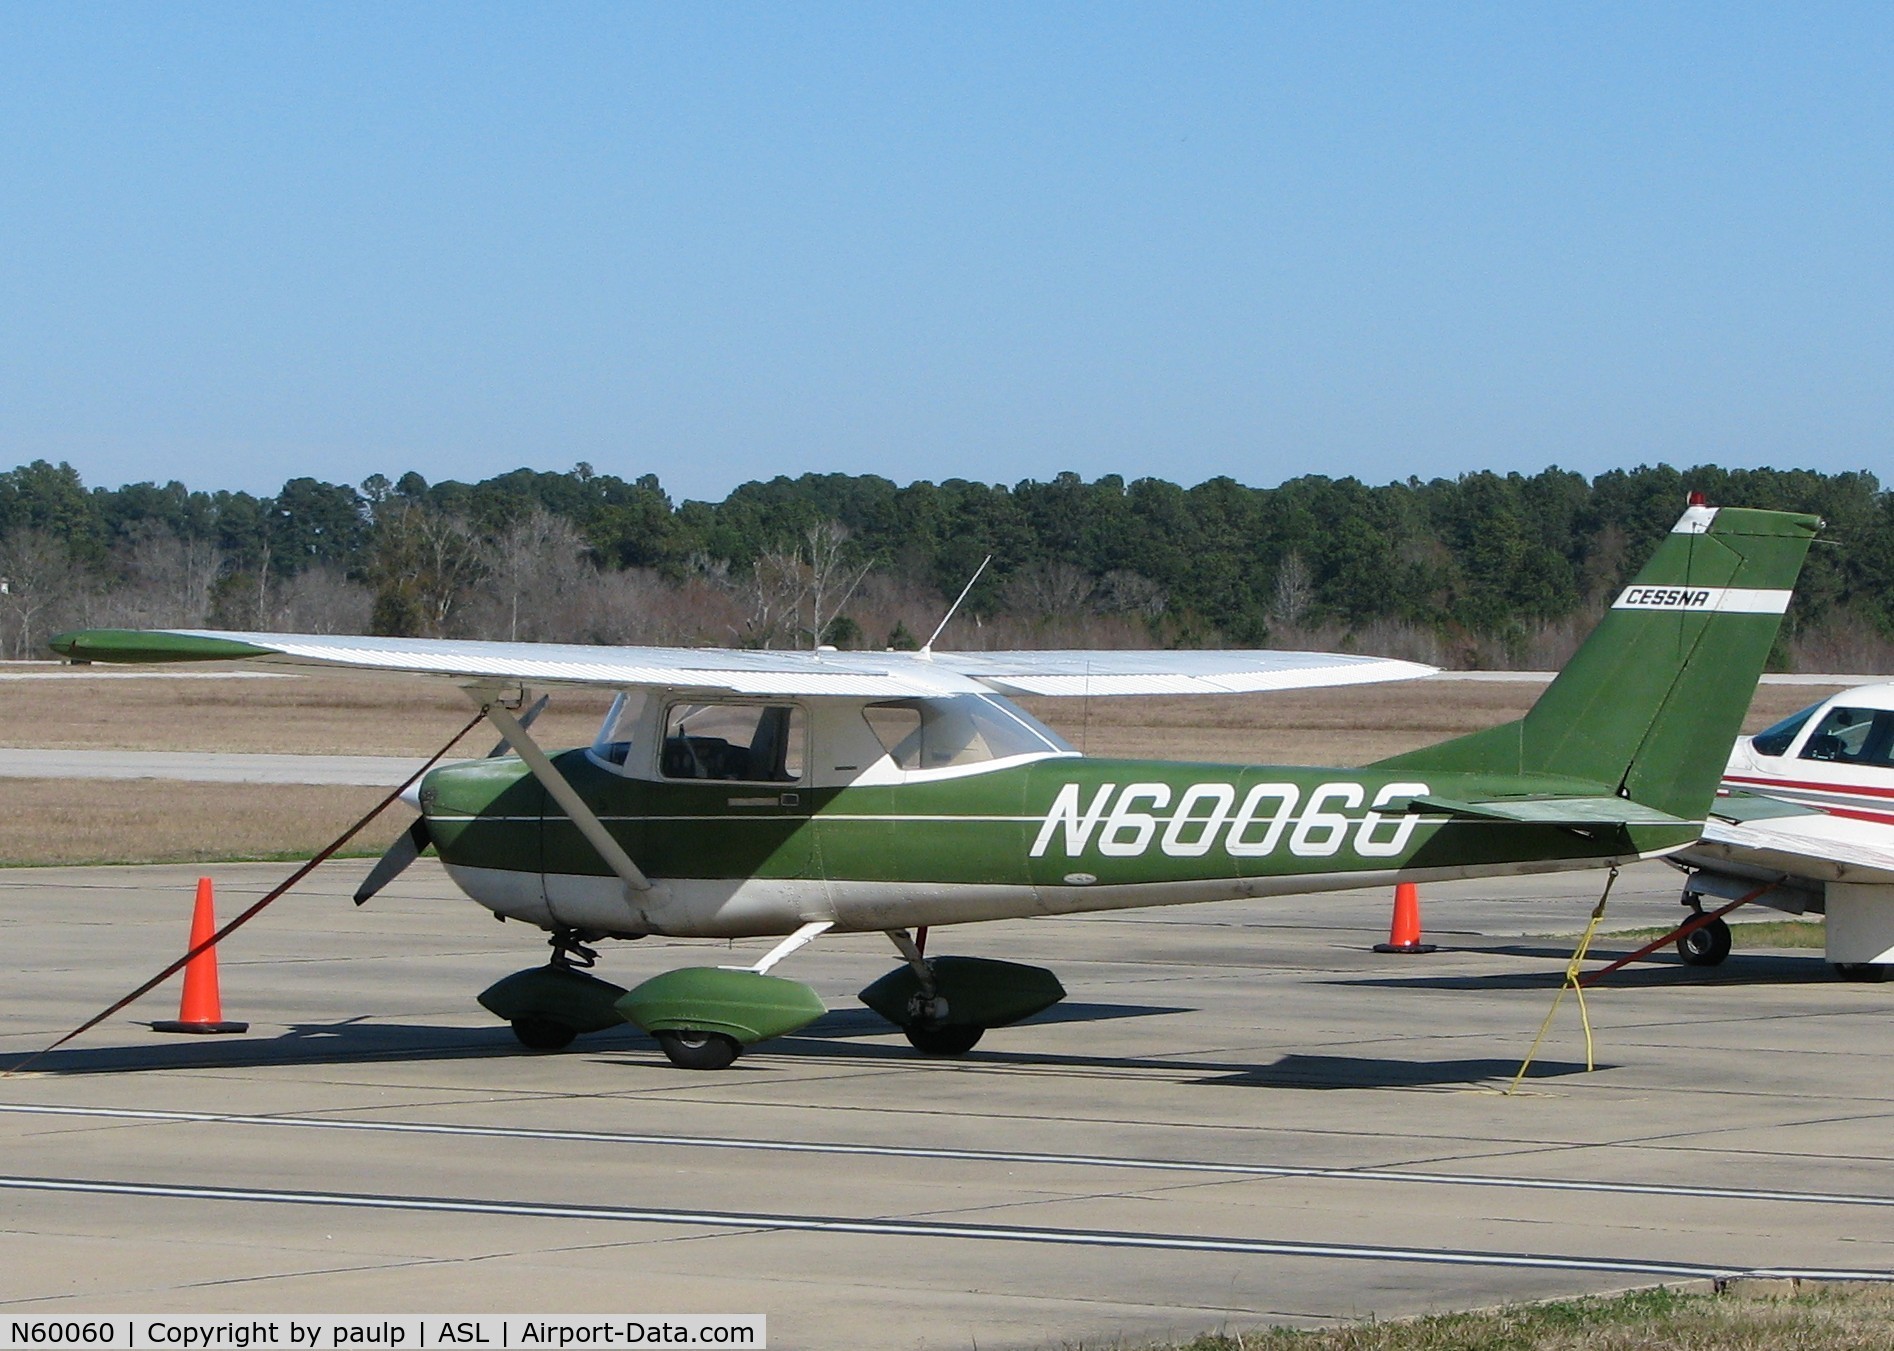 N60060, 1968 Cessna 150J C/N 15070043, Parked at the Marshall/Harrison County Texas airport.